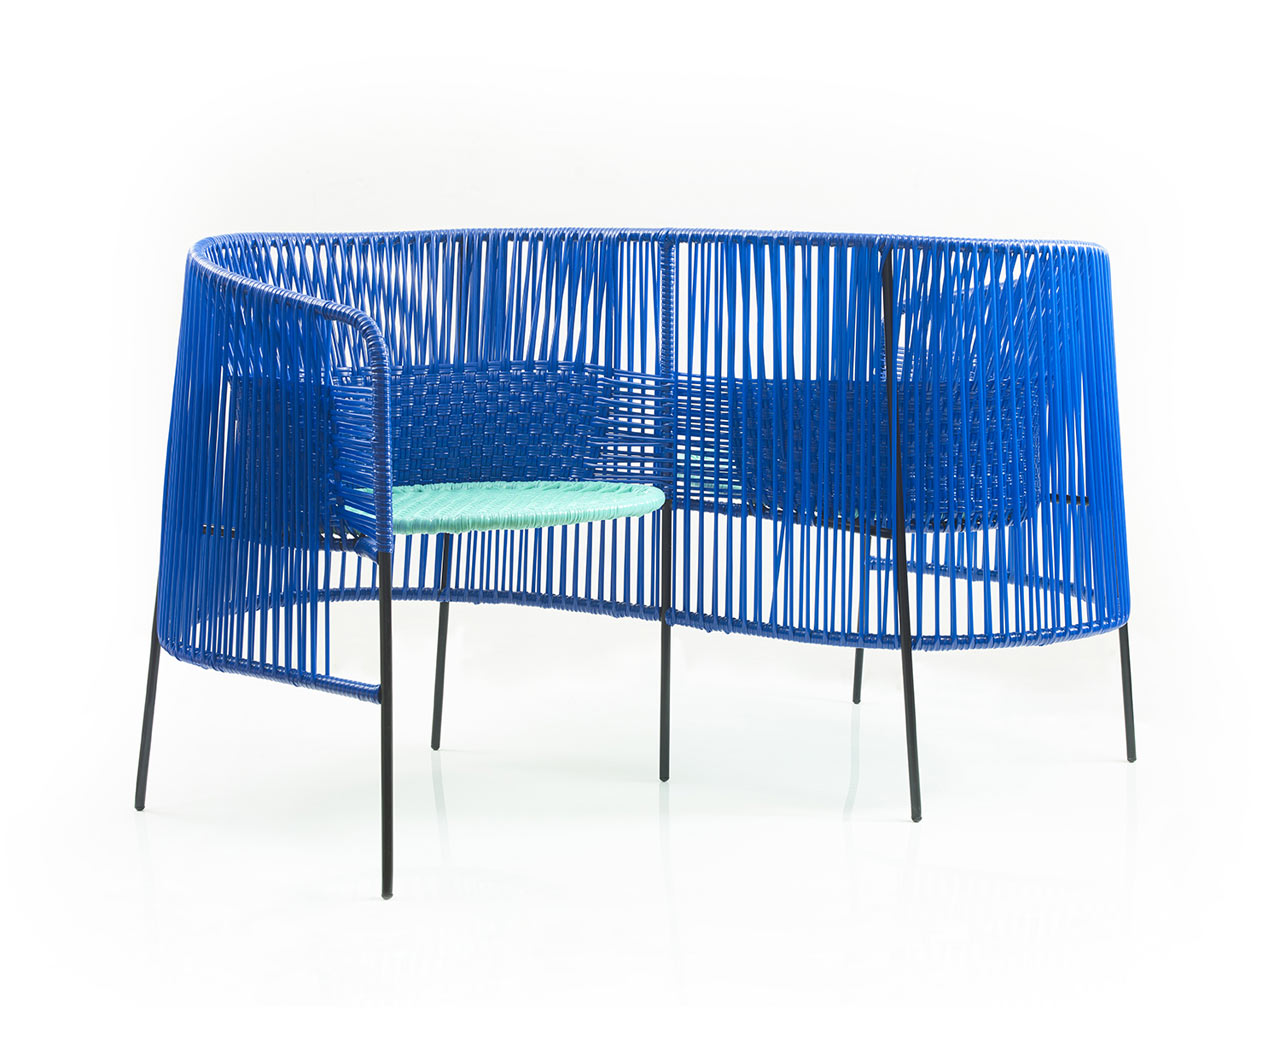 ames Launches CARIBE, a Colorful Outdoor Collection Made of Recycled Plastic-11